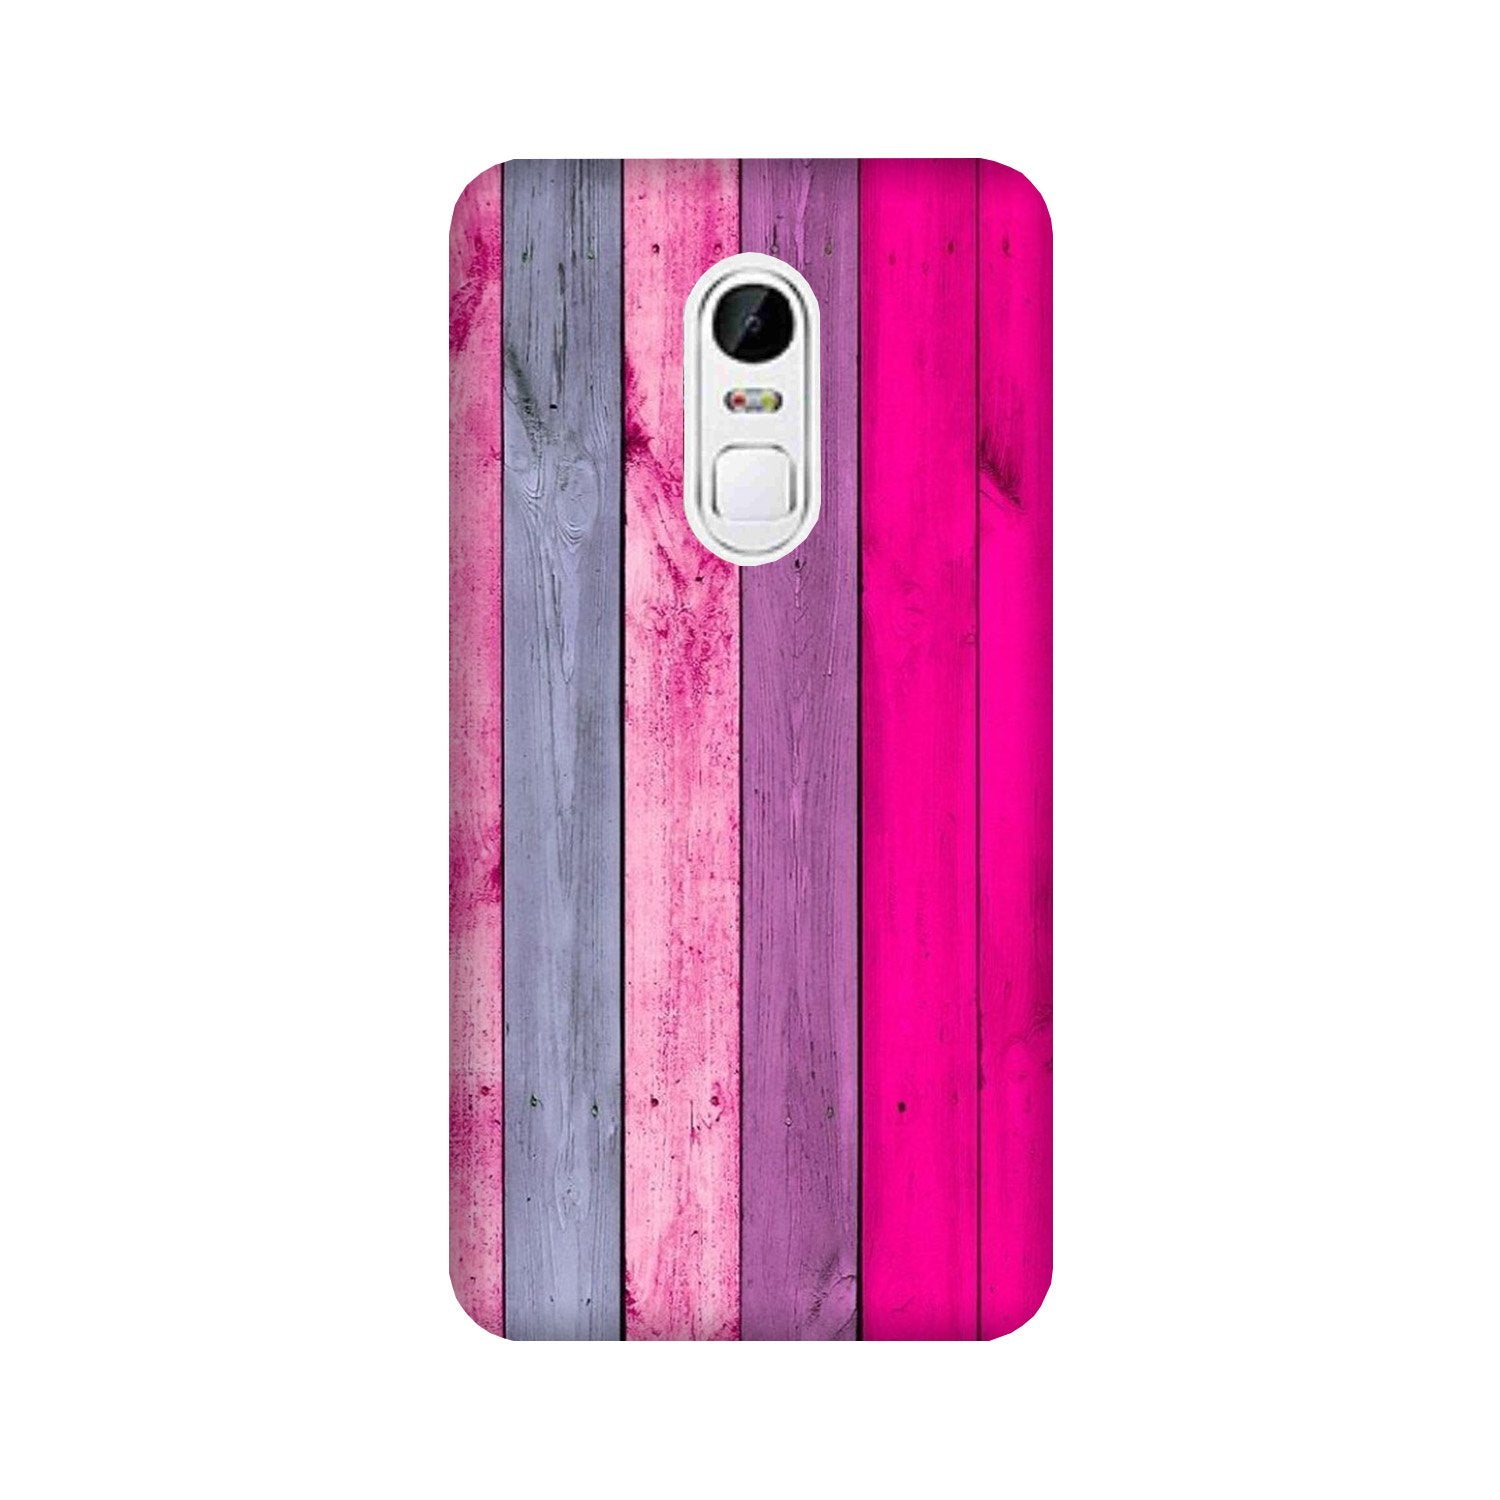 Wooden look Case for Lenovo Vibe X3